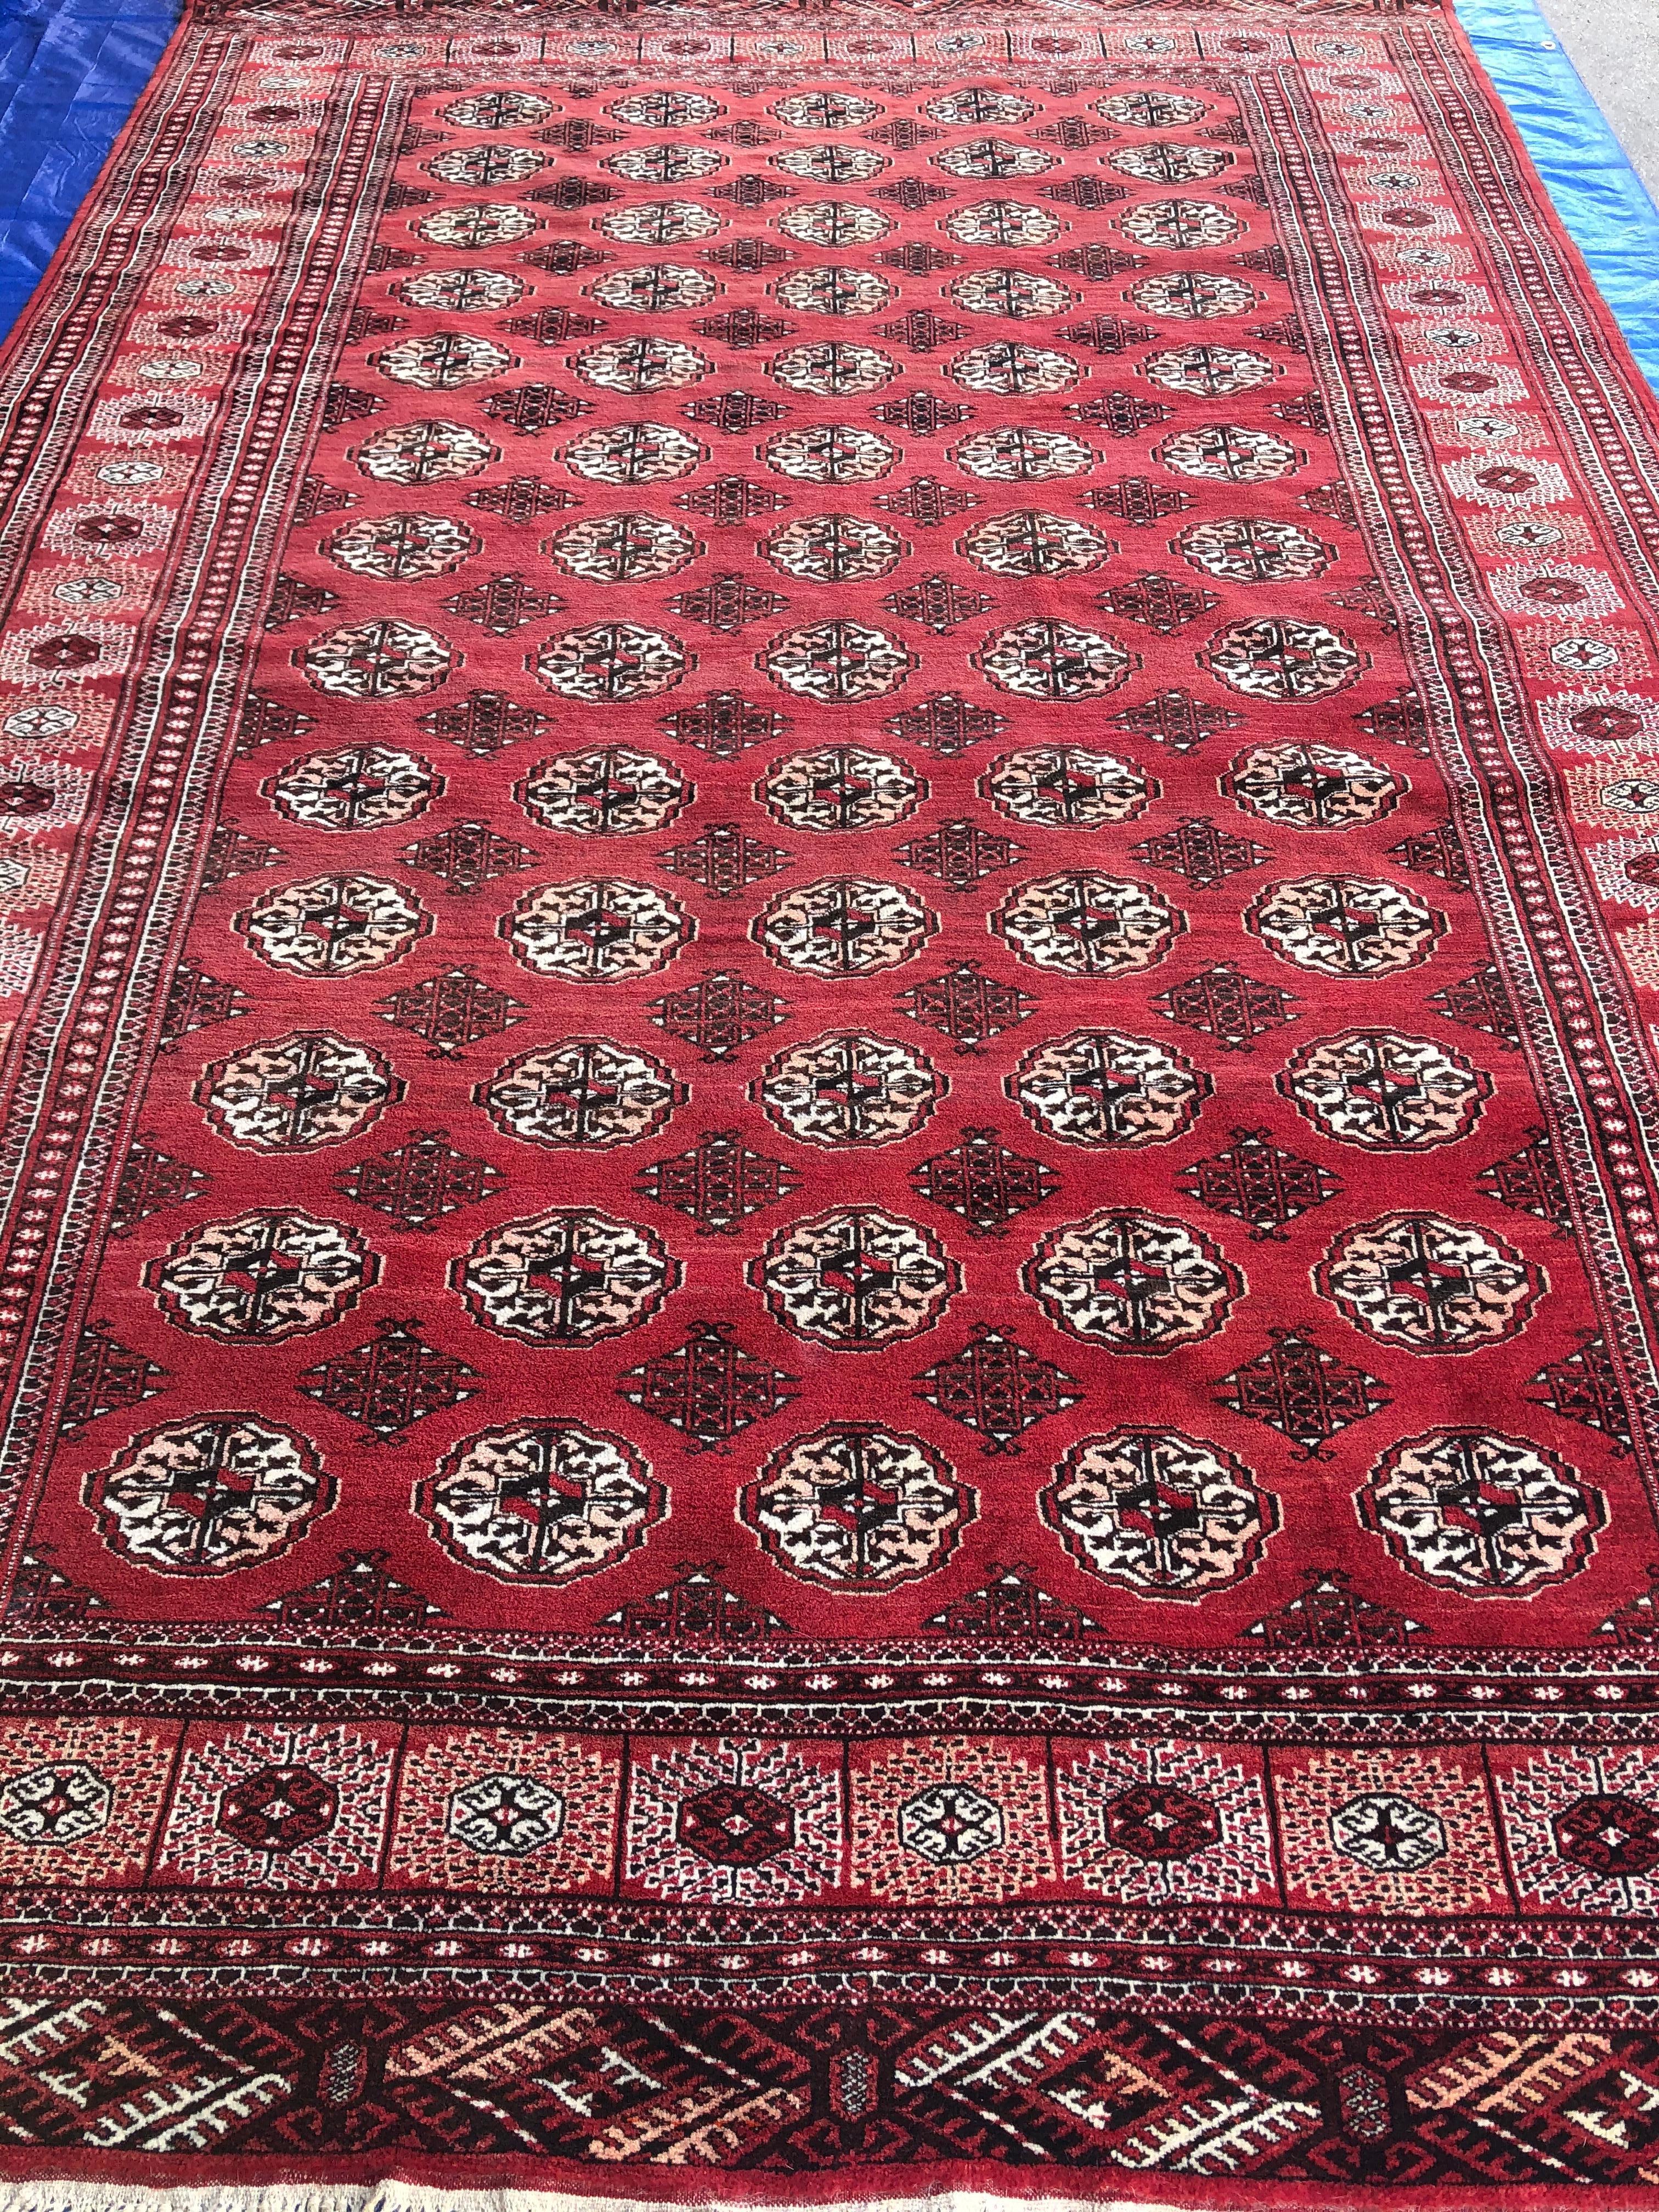 Tribal Antique Red Afghan Ersari Hand Knotted Turkoman Rug, circa 1920 For Sale